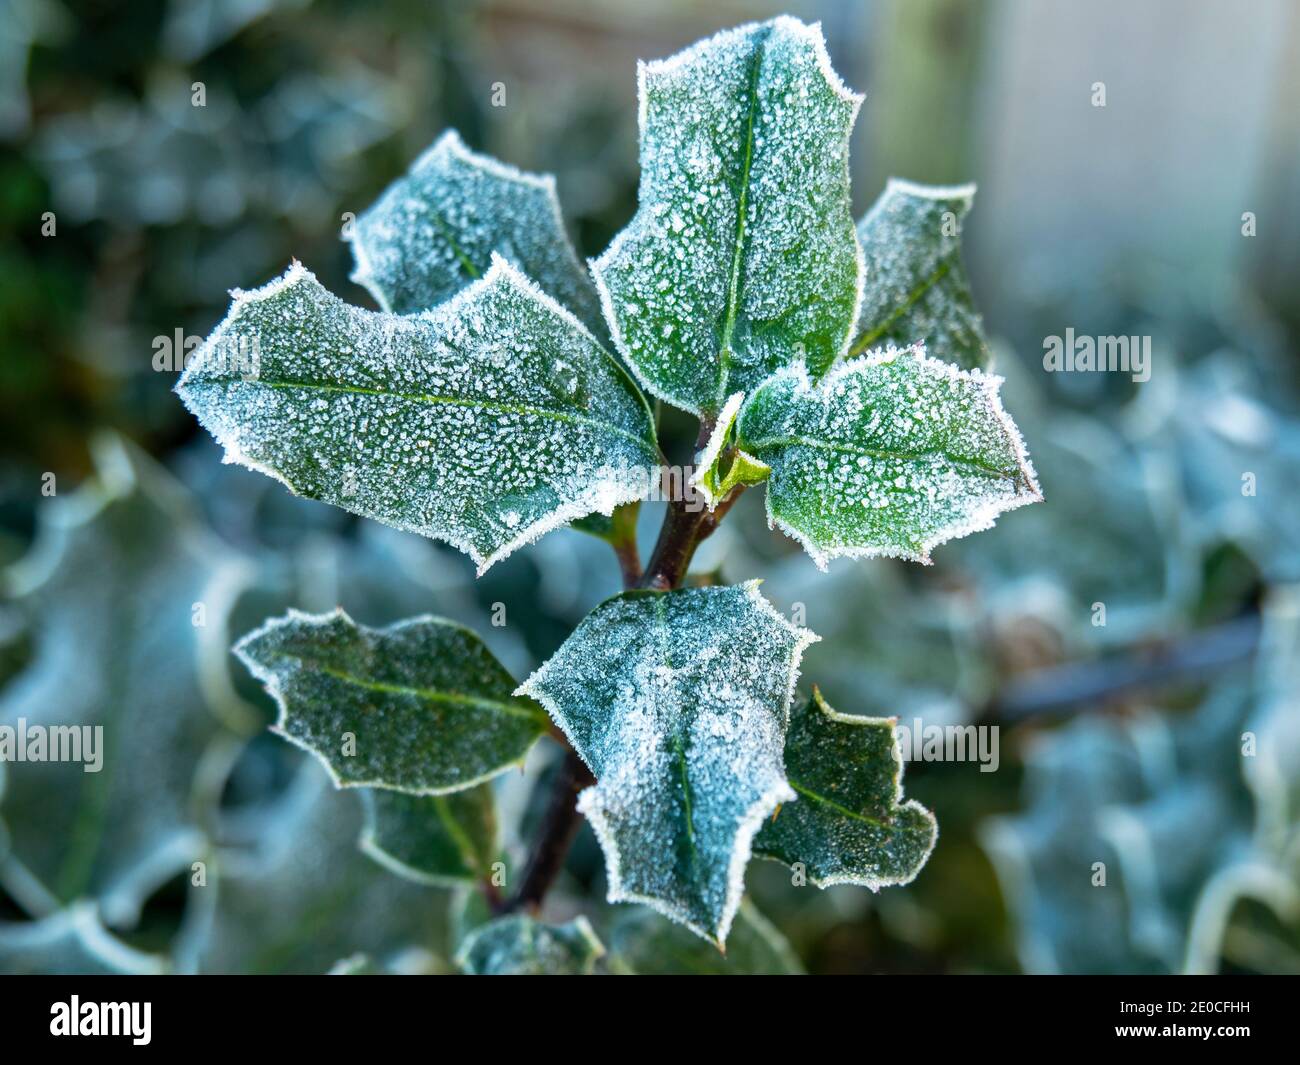 Frosty green leaves with ice crystals on a holly bush in a garden in winter Stock Photo